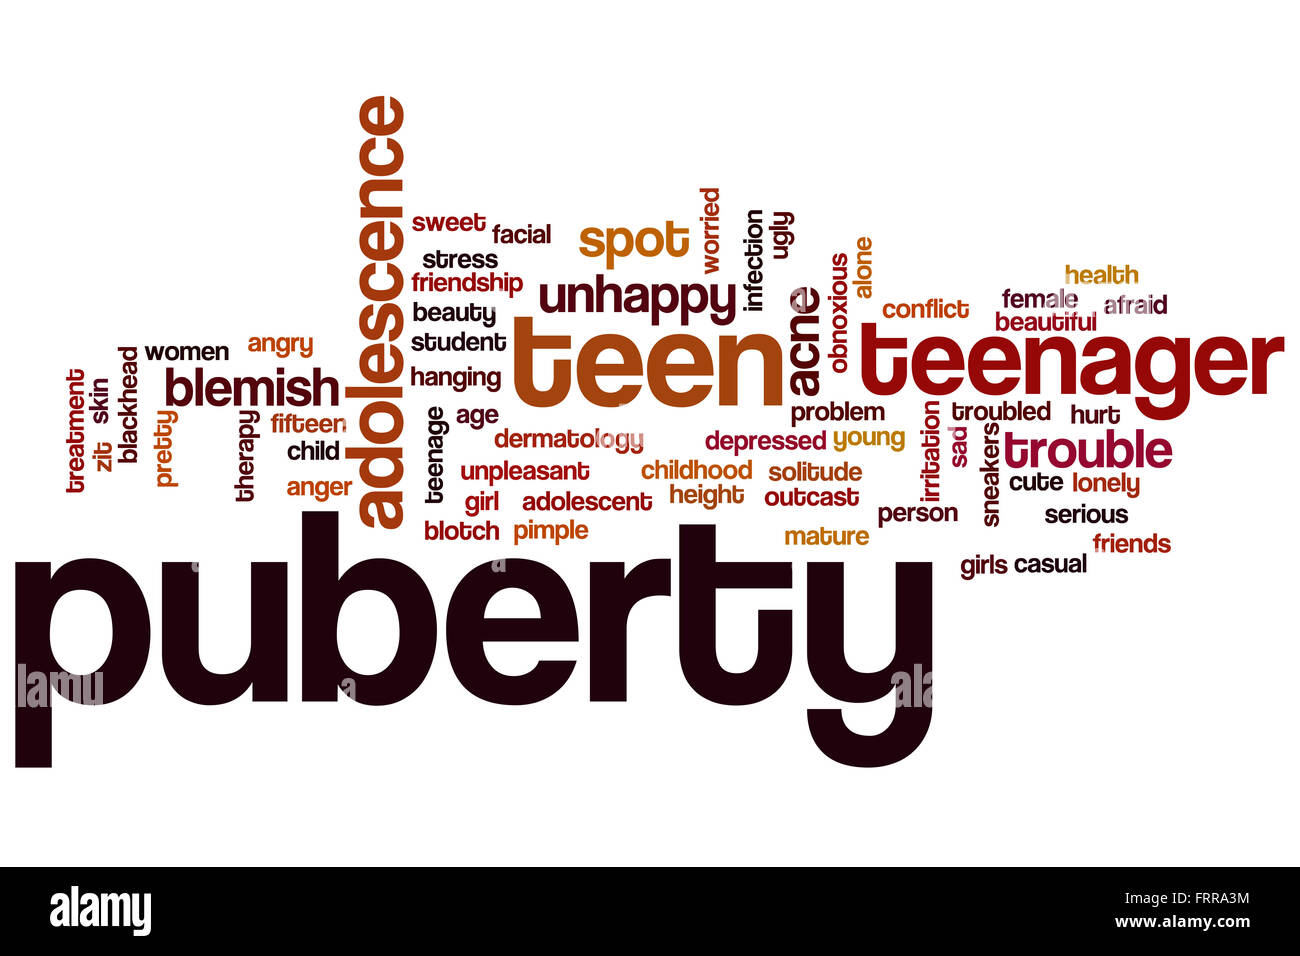 Puberty word cloud concept Stock Photo